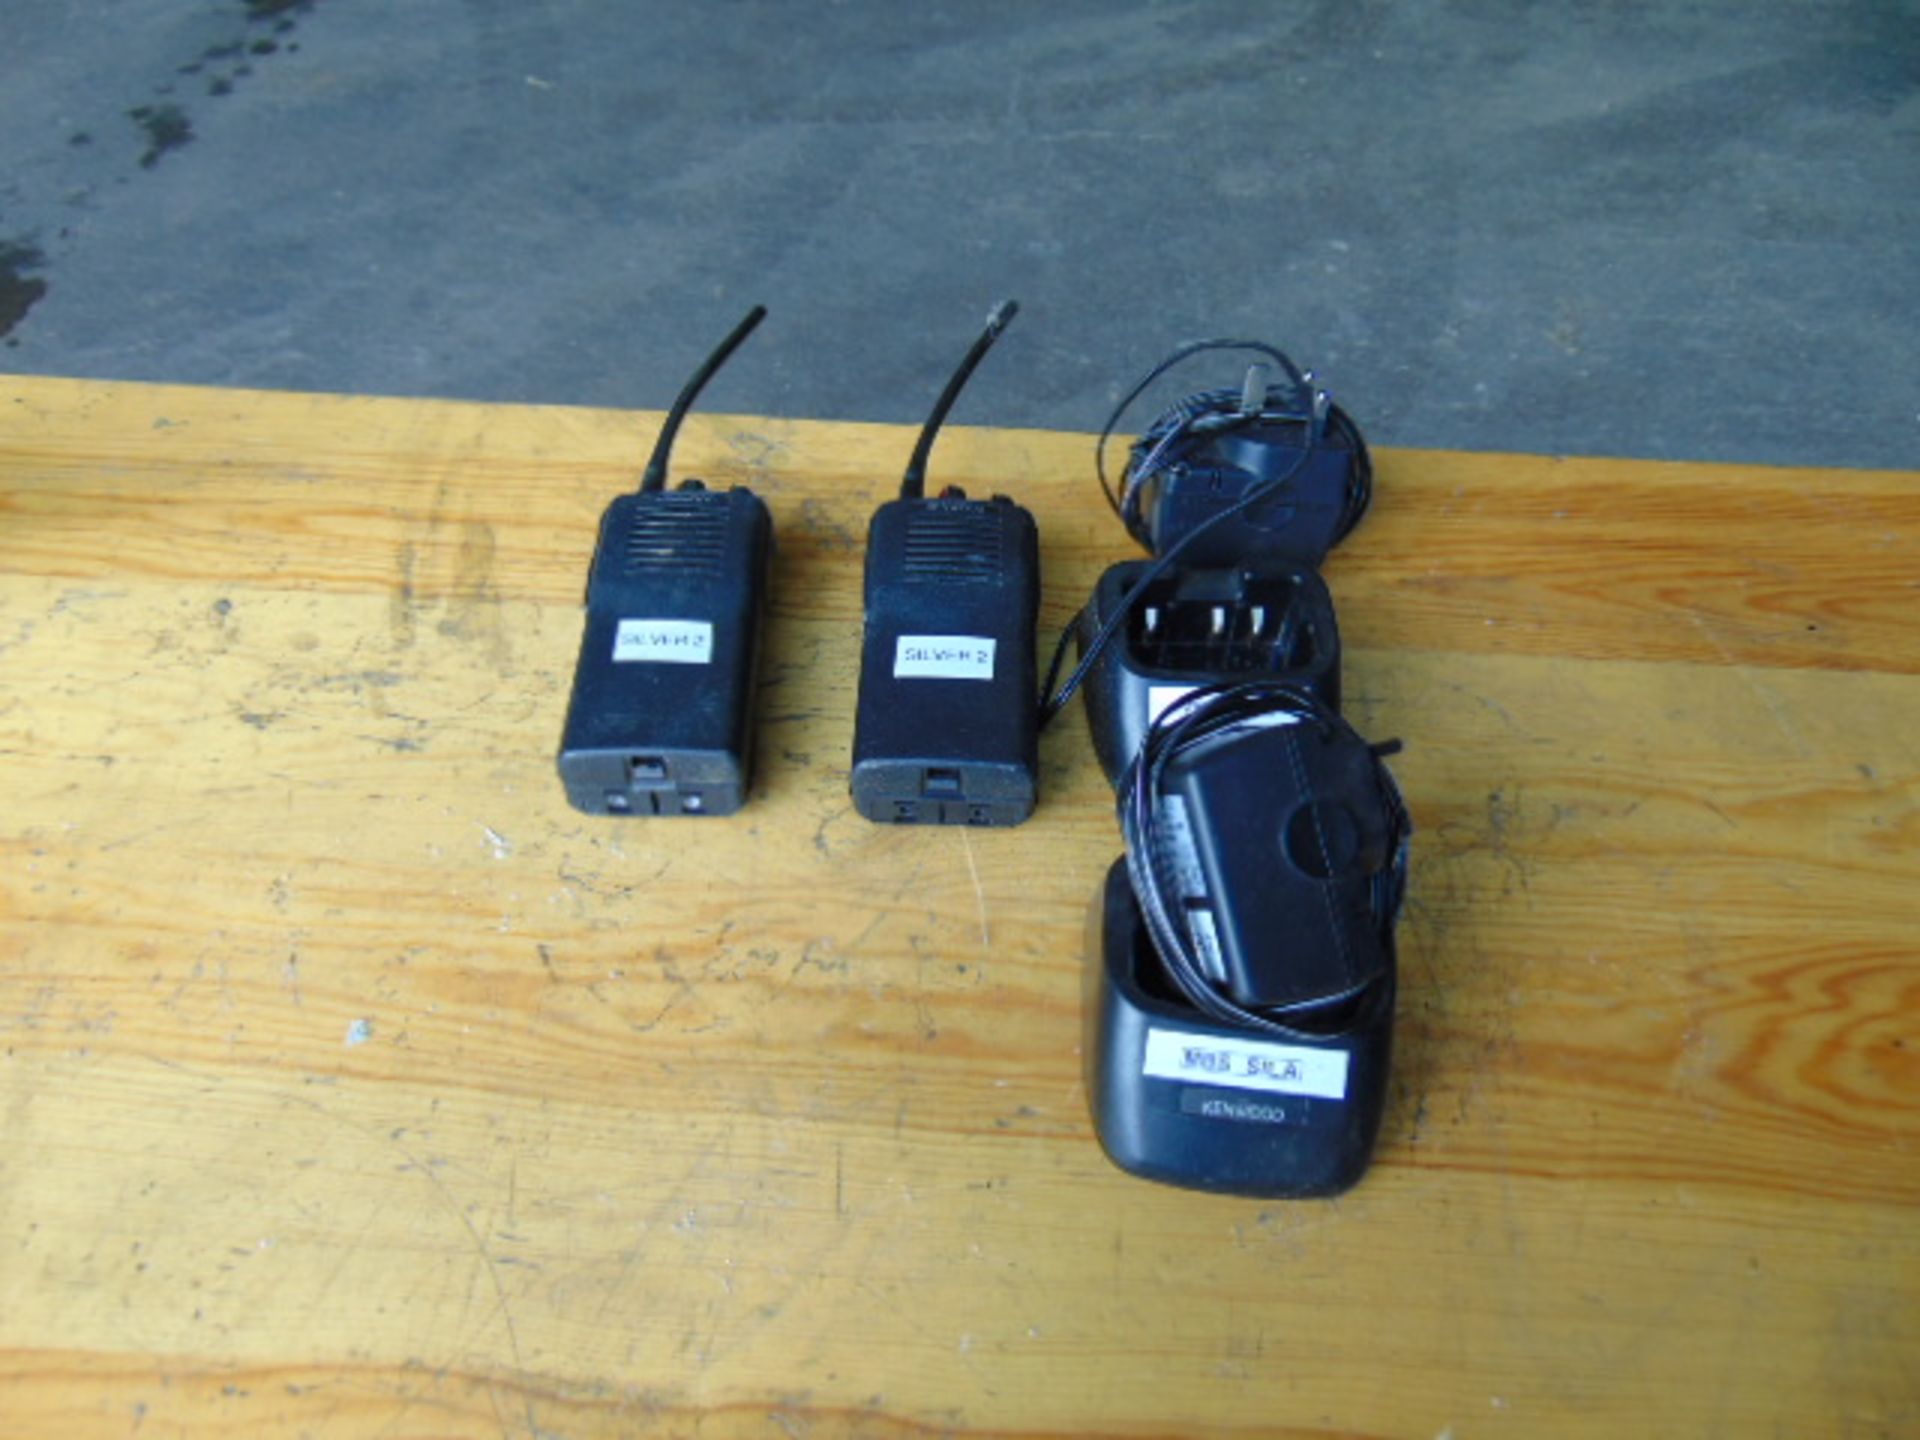 2 x Kenwood Walkie Talkies c/w Chargers and Main Adapters - Image 5 of 6